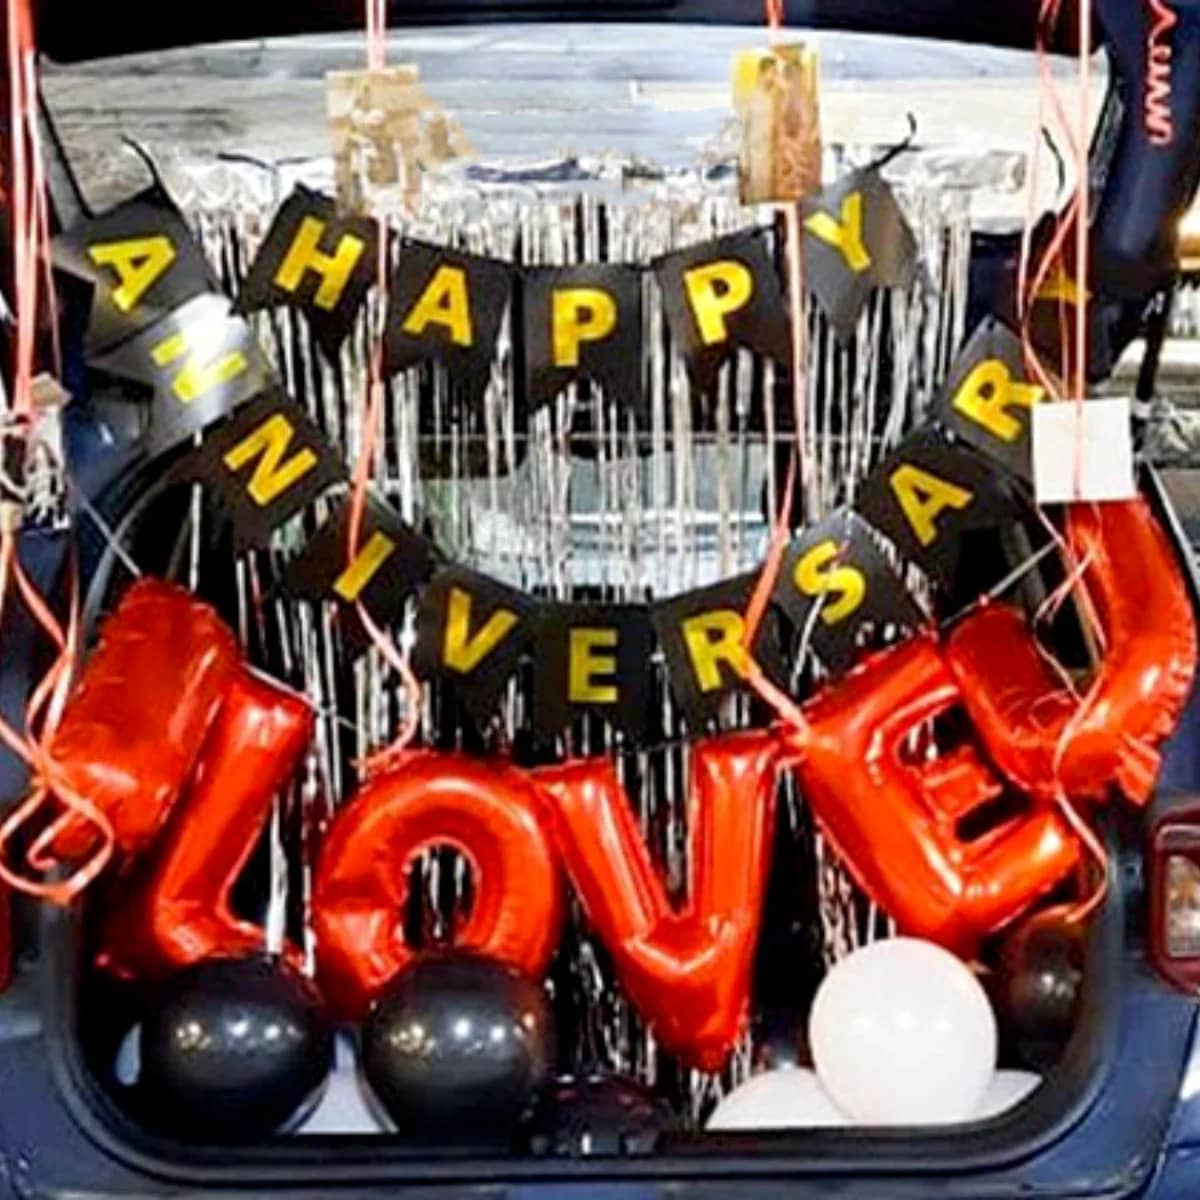 Car Balloon Surprise - Unique Anniversary Gift for Your Husband